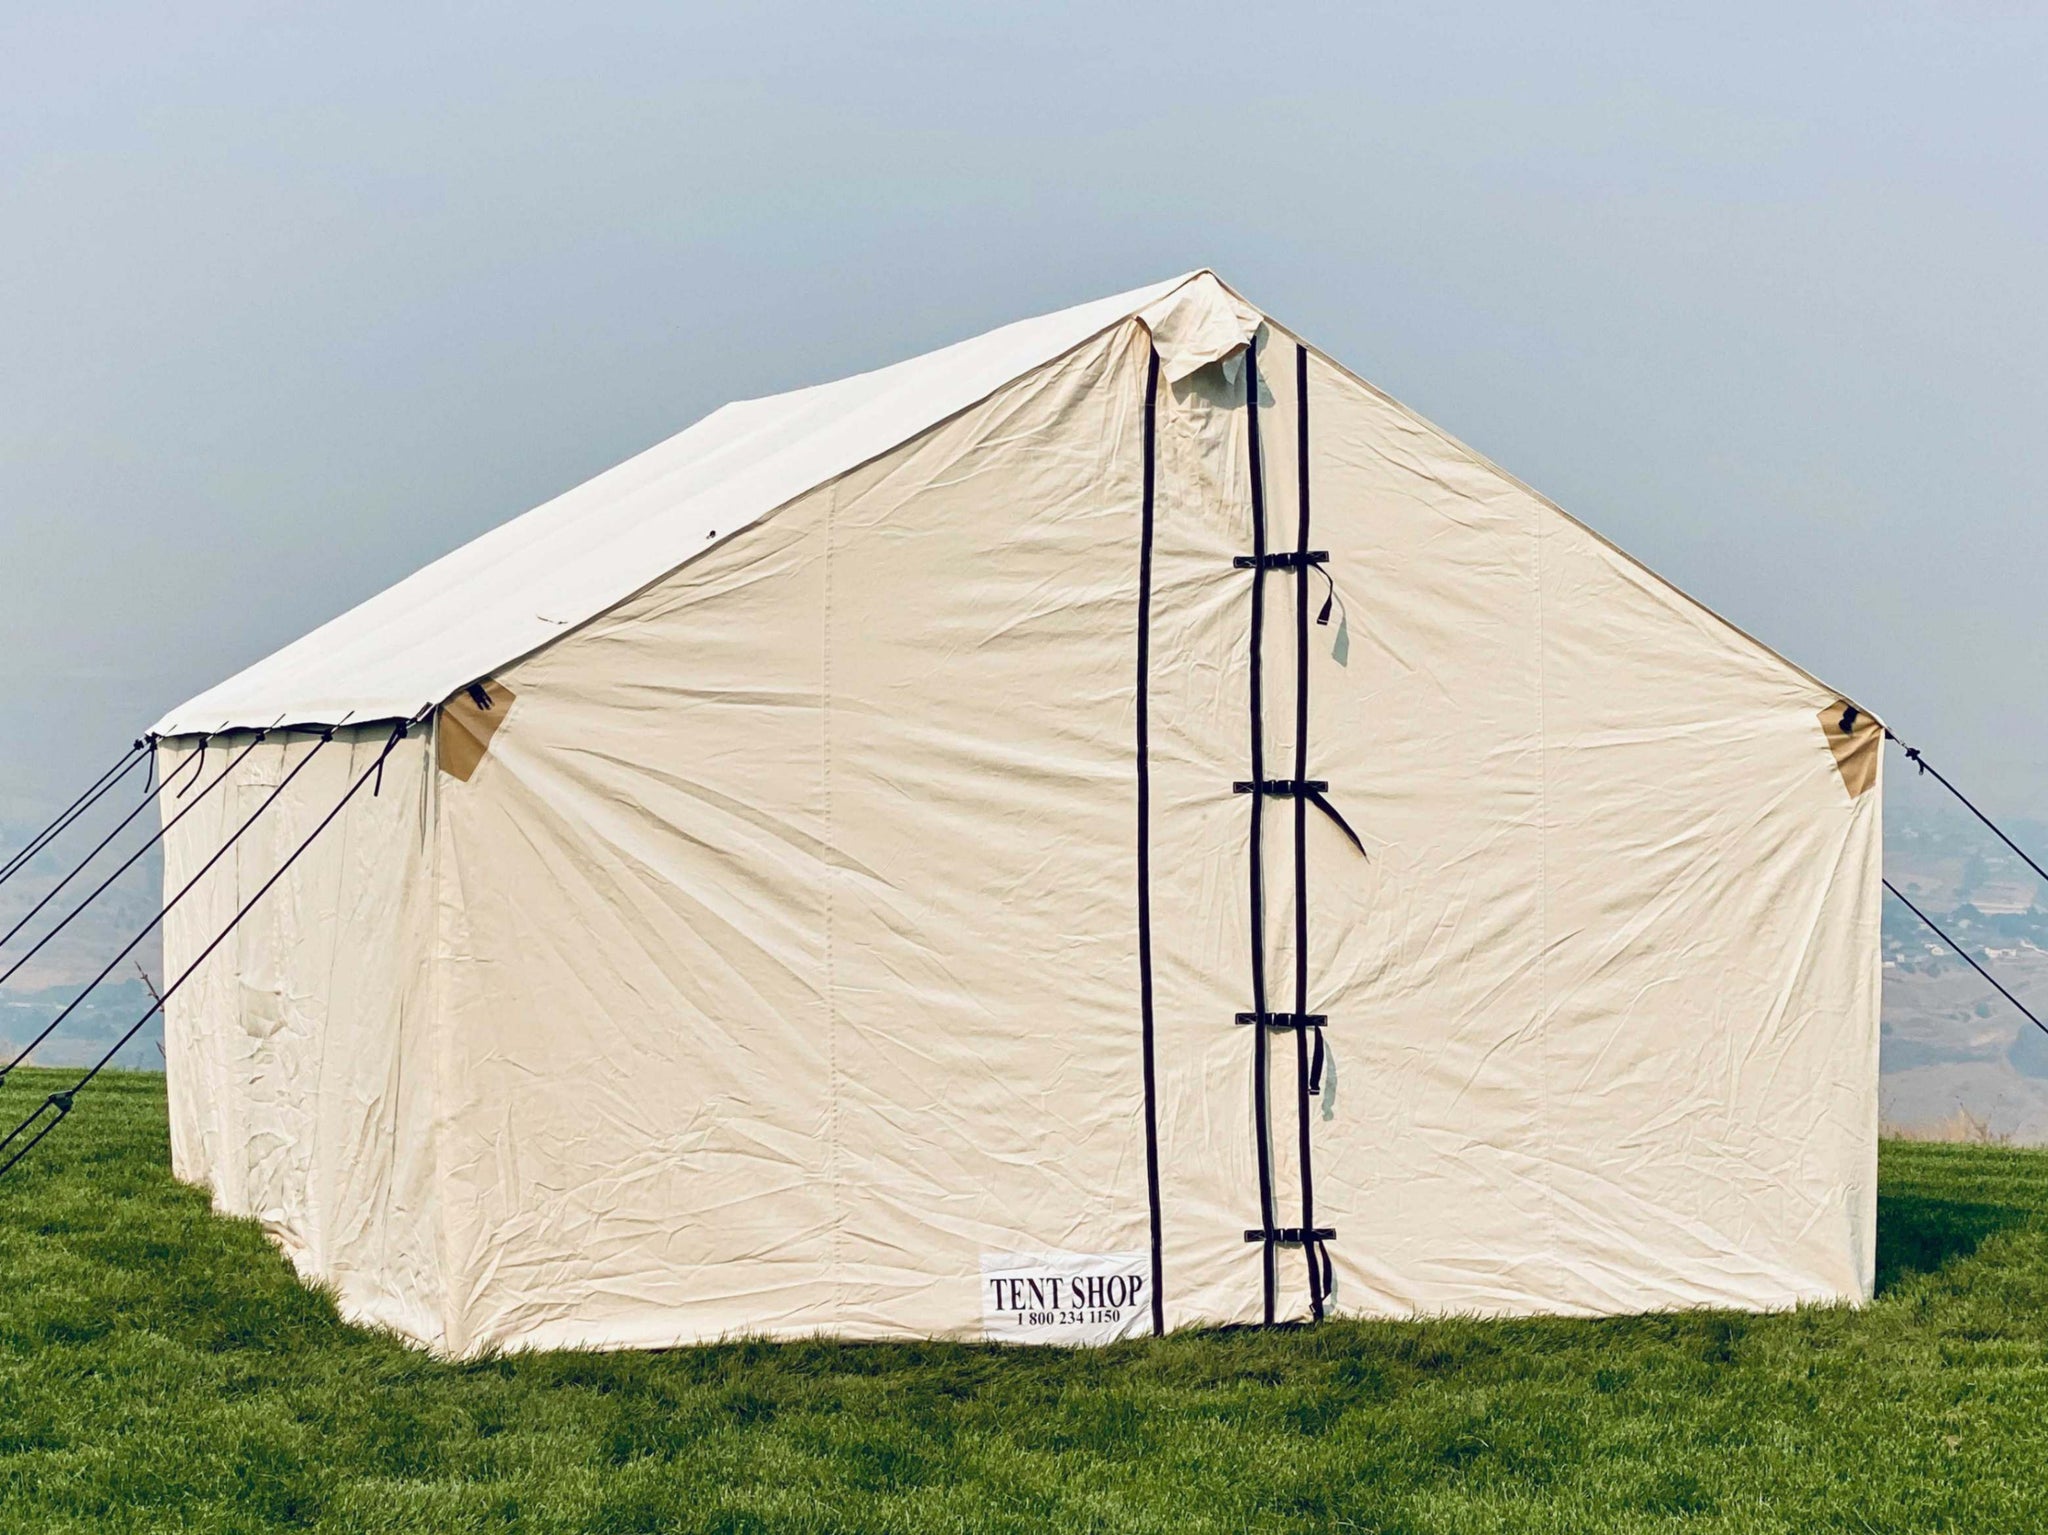 CANVAS TENTS - LOWEST PRICES IN CANADA